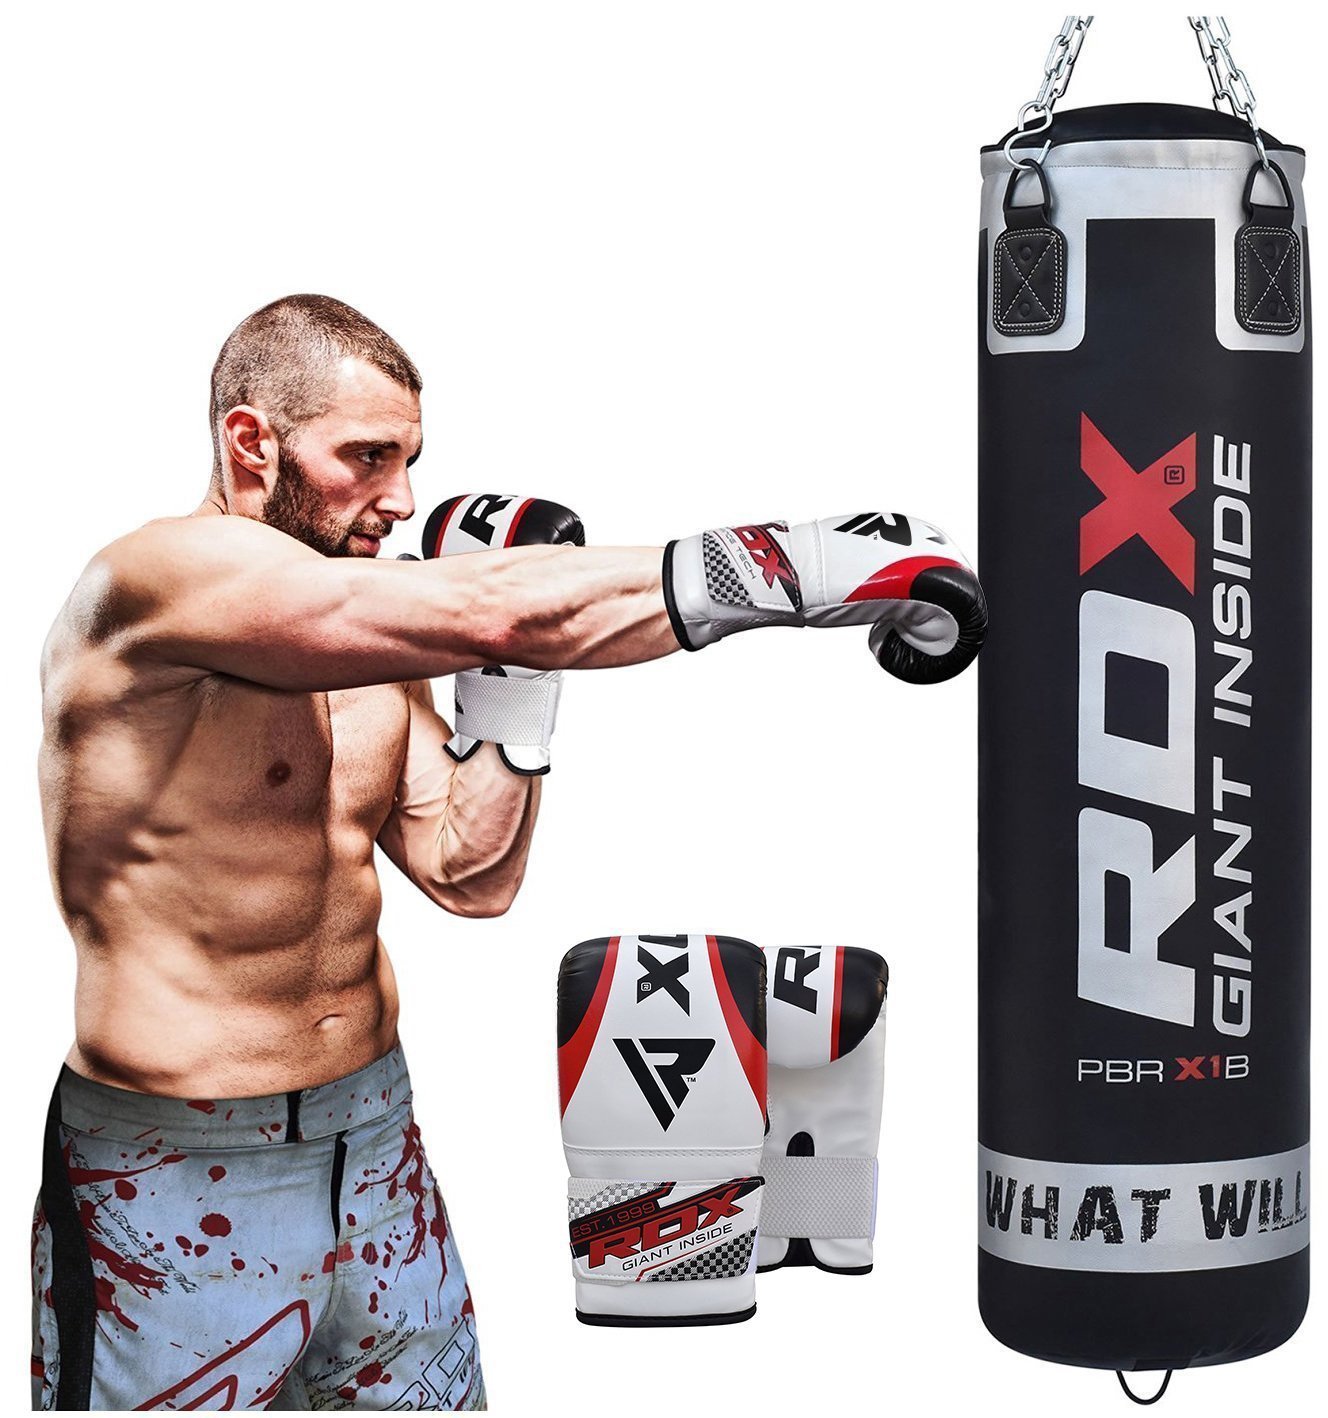 Fighting 101- Cheap Punching Bag for Sale Amazon: Is Warming Up important? - Punching Bags Now